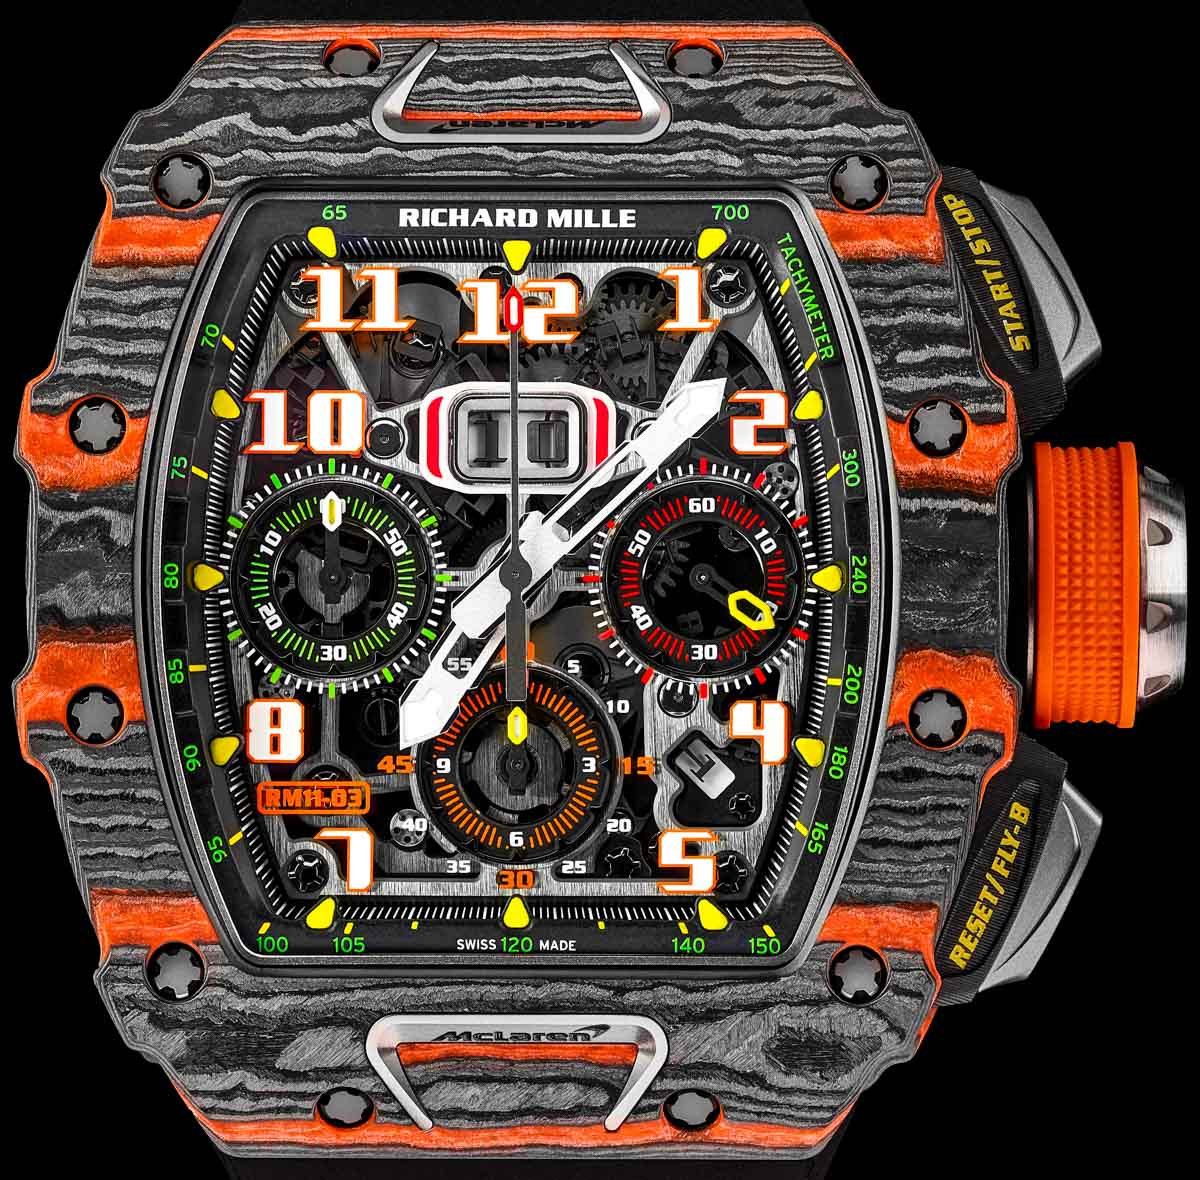 Richard Mille RM 11-03 McLaren Automatic Flyback Chronograph Watch Releases 